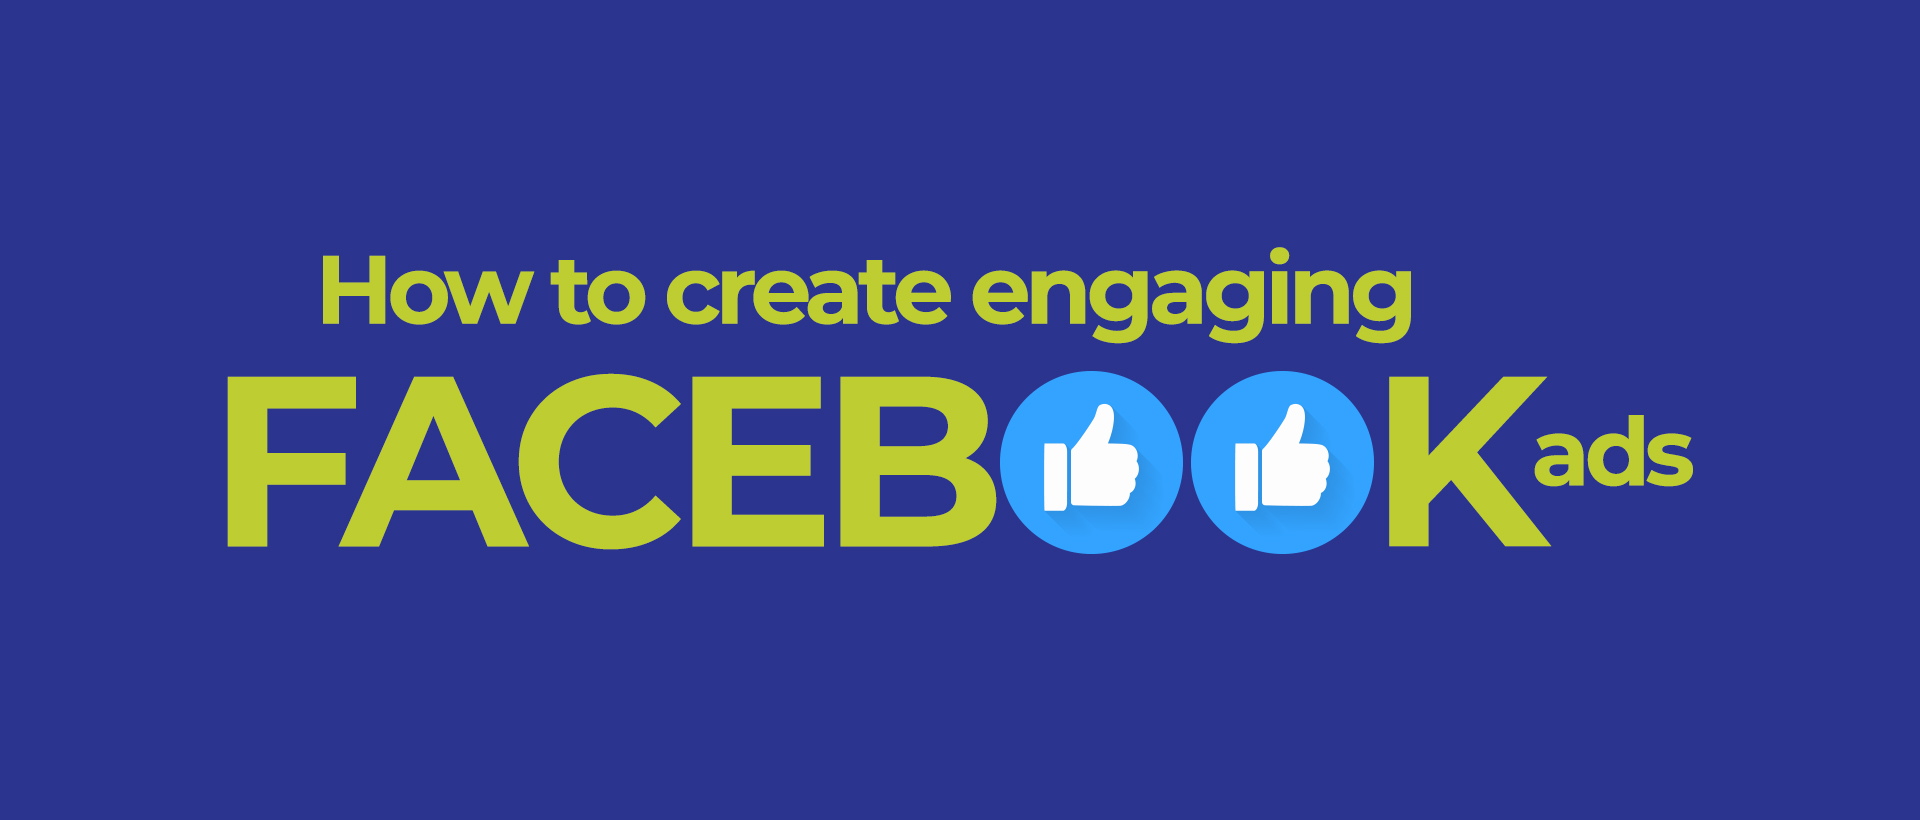 How to create engaging Facebook ads